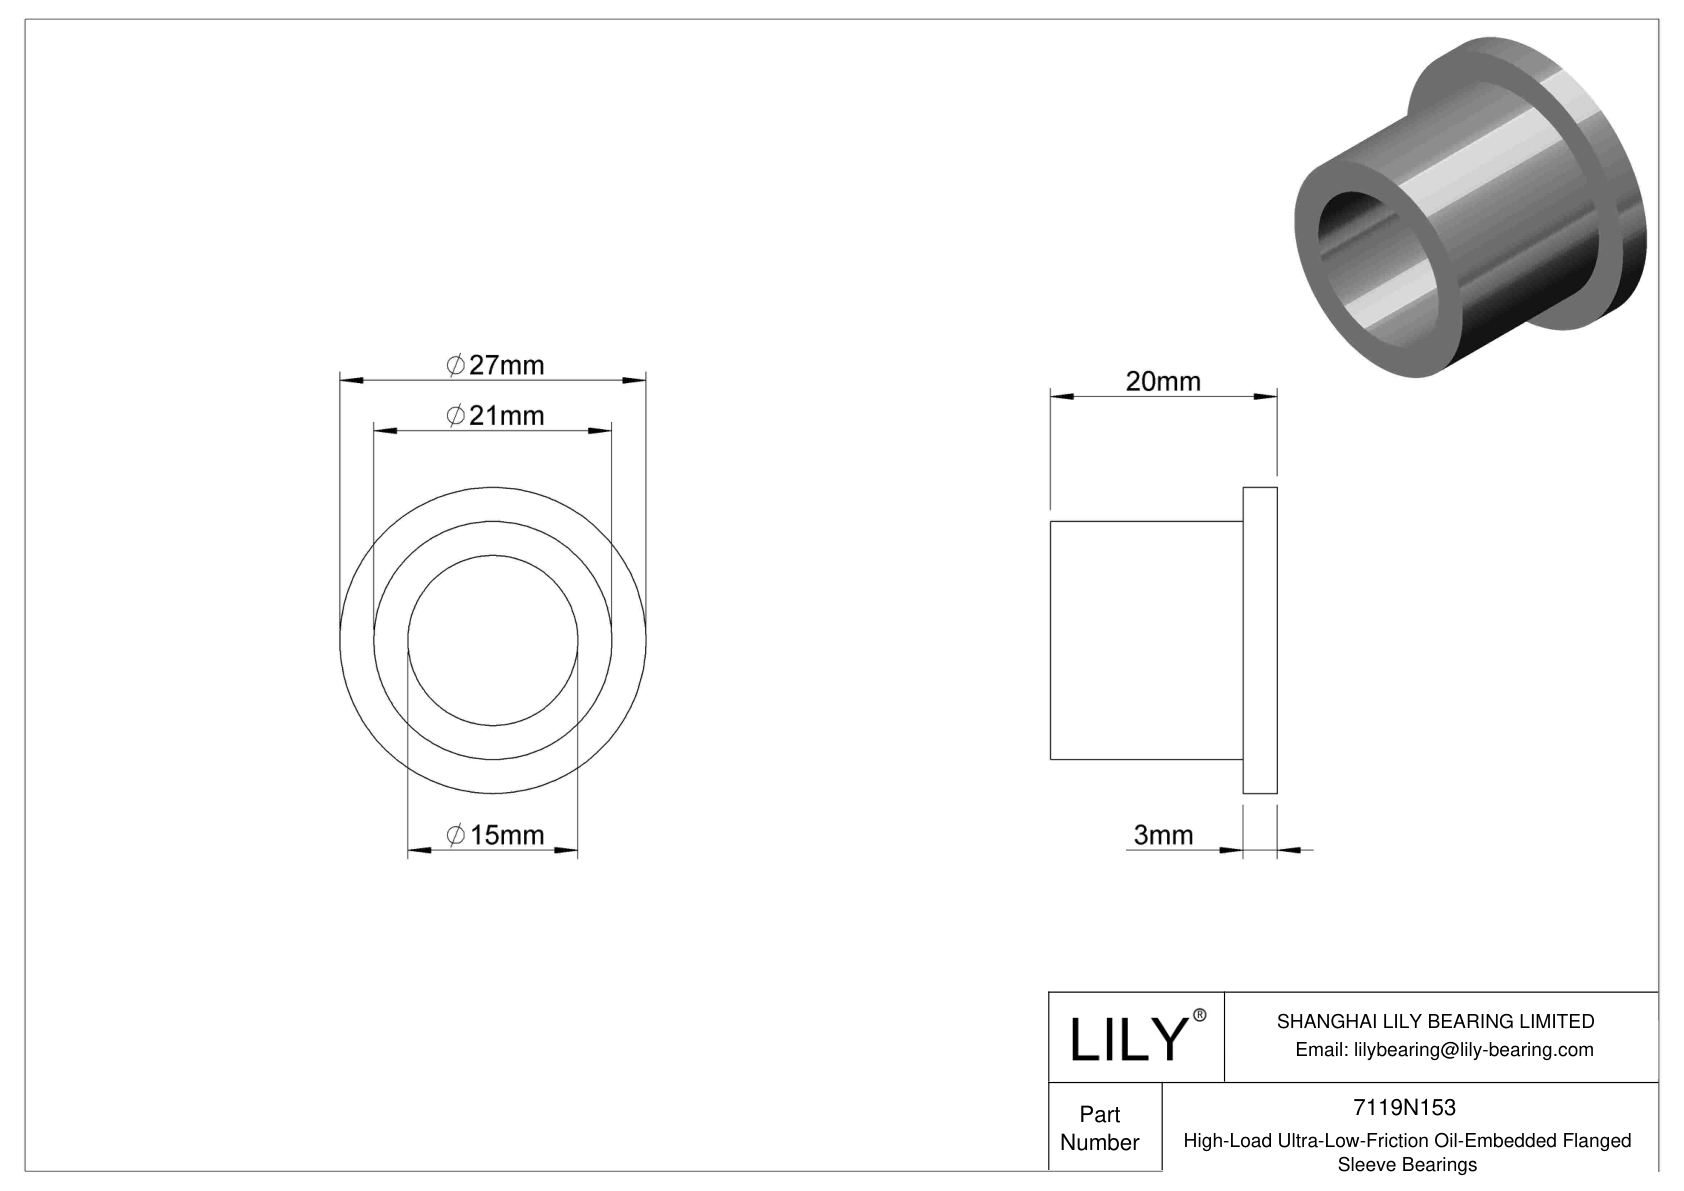 HBBJNBFD High-Load Ultra-Low-Friction Oil-Embedded Flanged Sleeve Bearings cad drawing